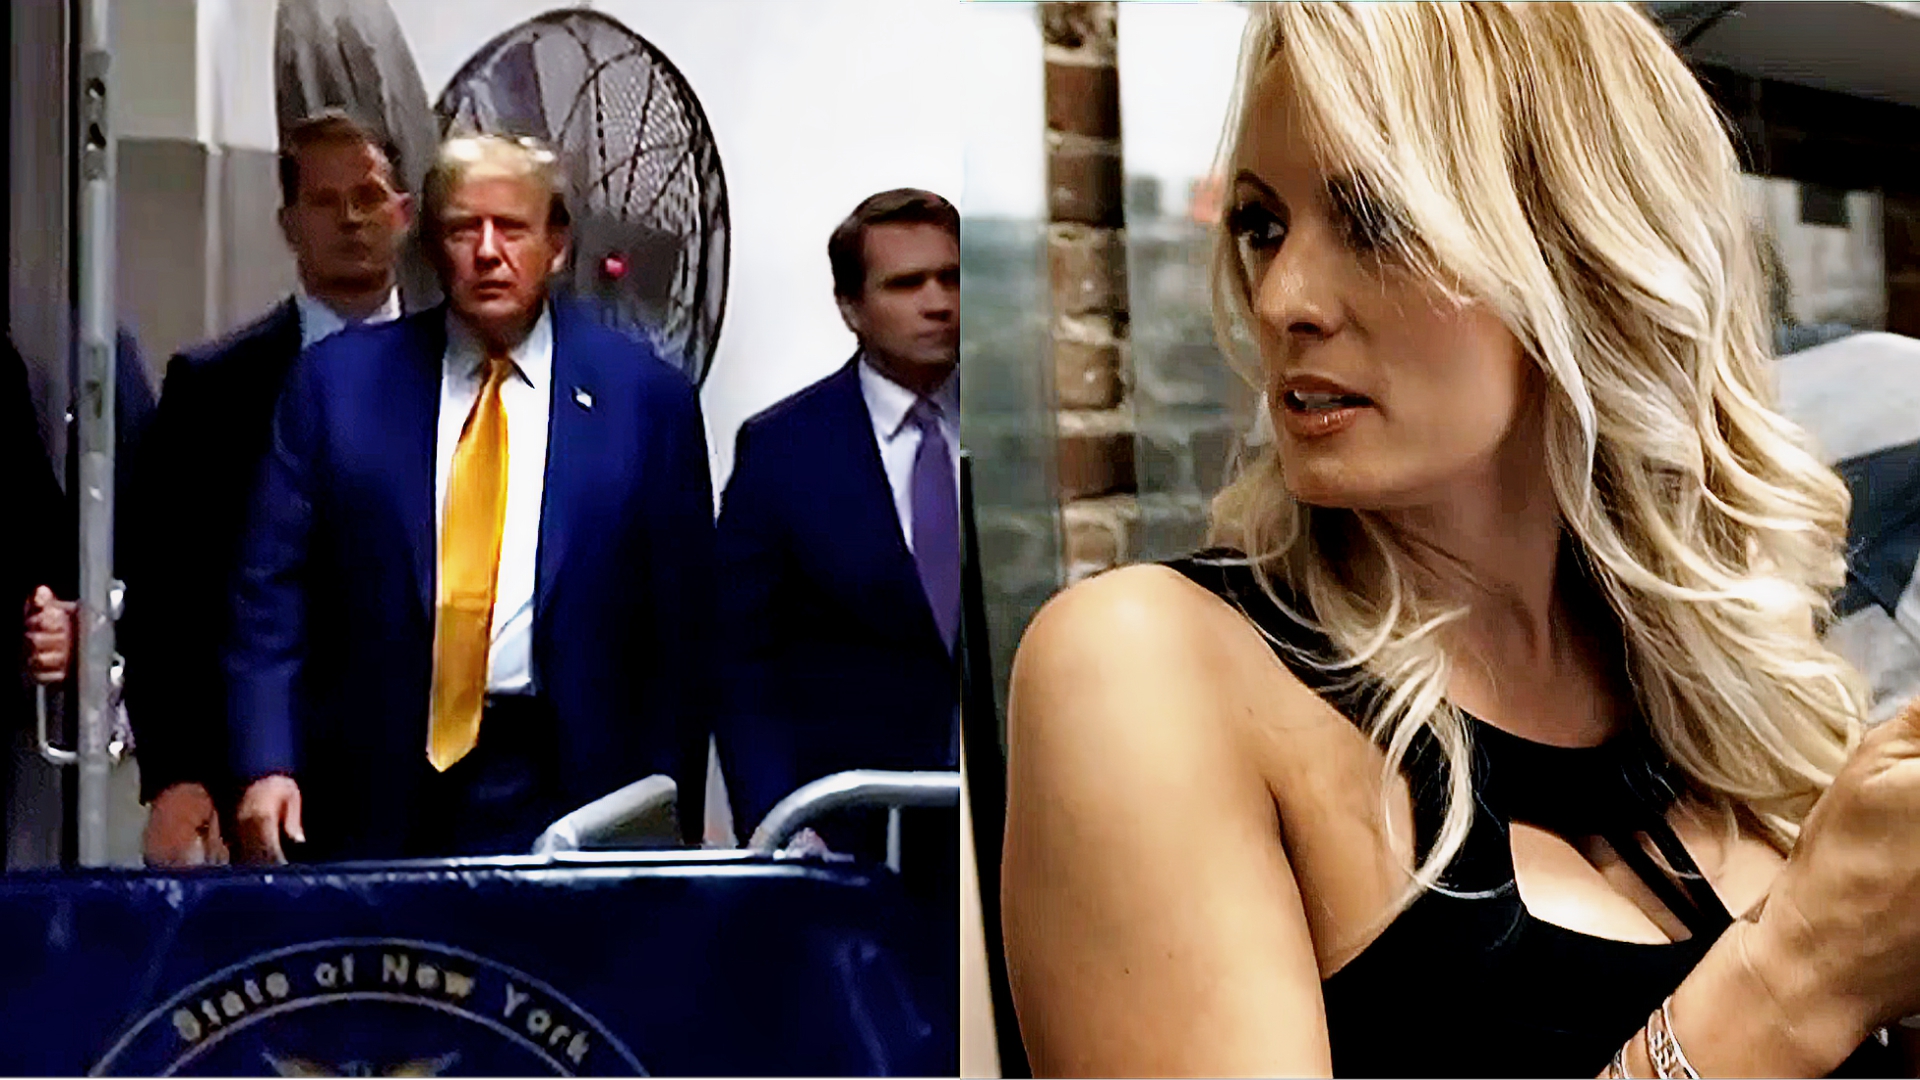 Reporters Bombard Trump at Court After Stormy Daniels News [Video]